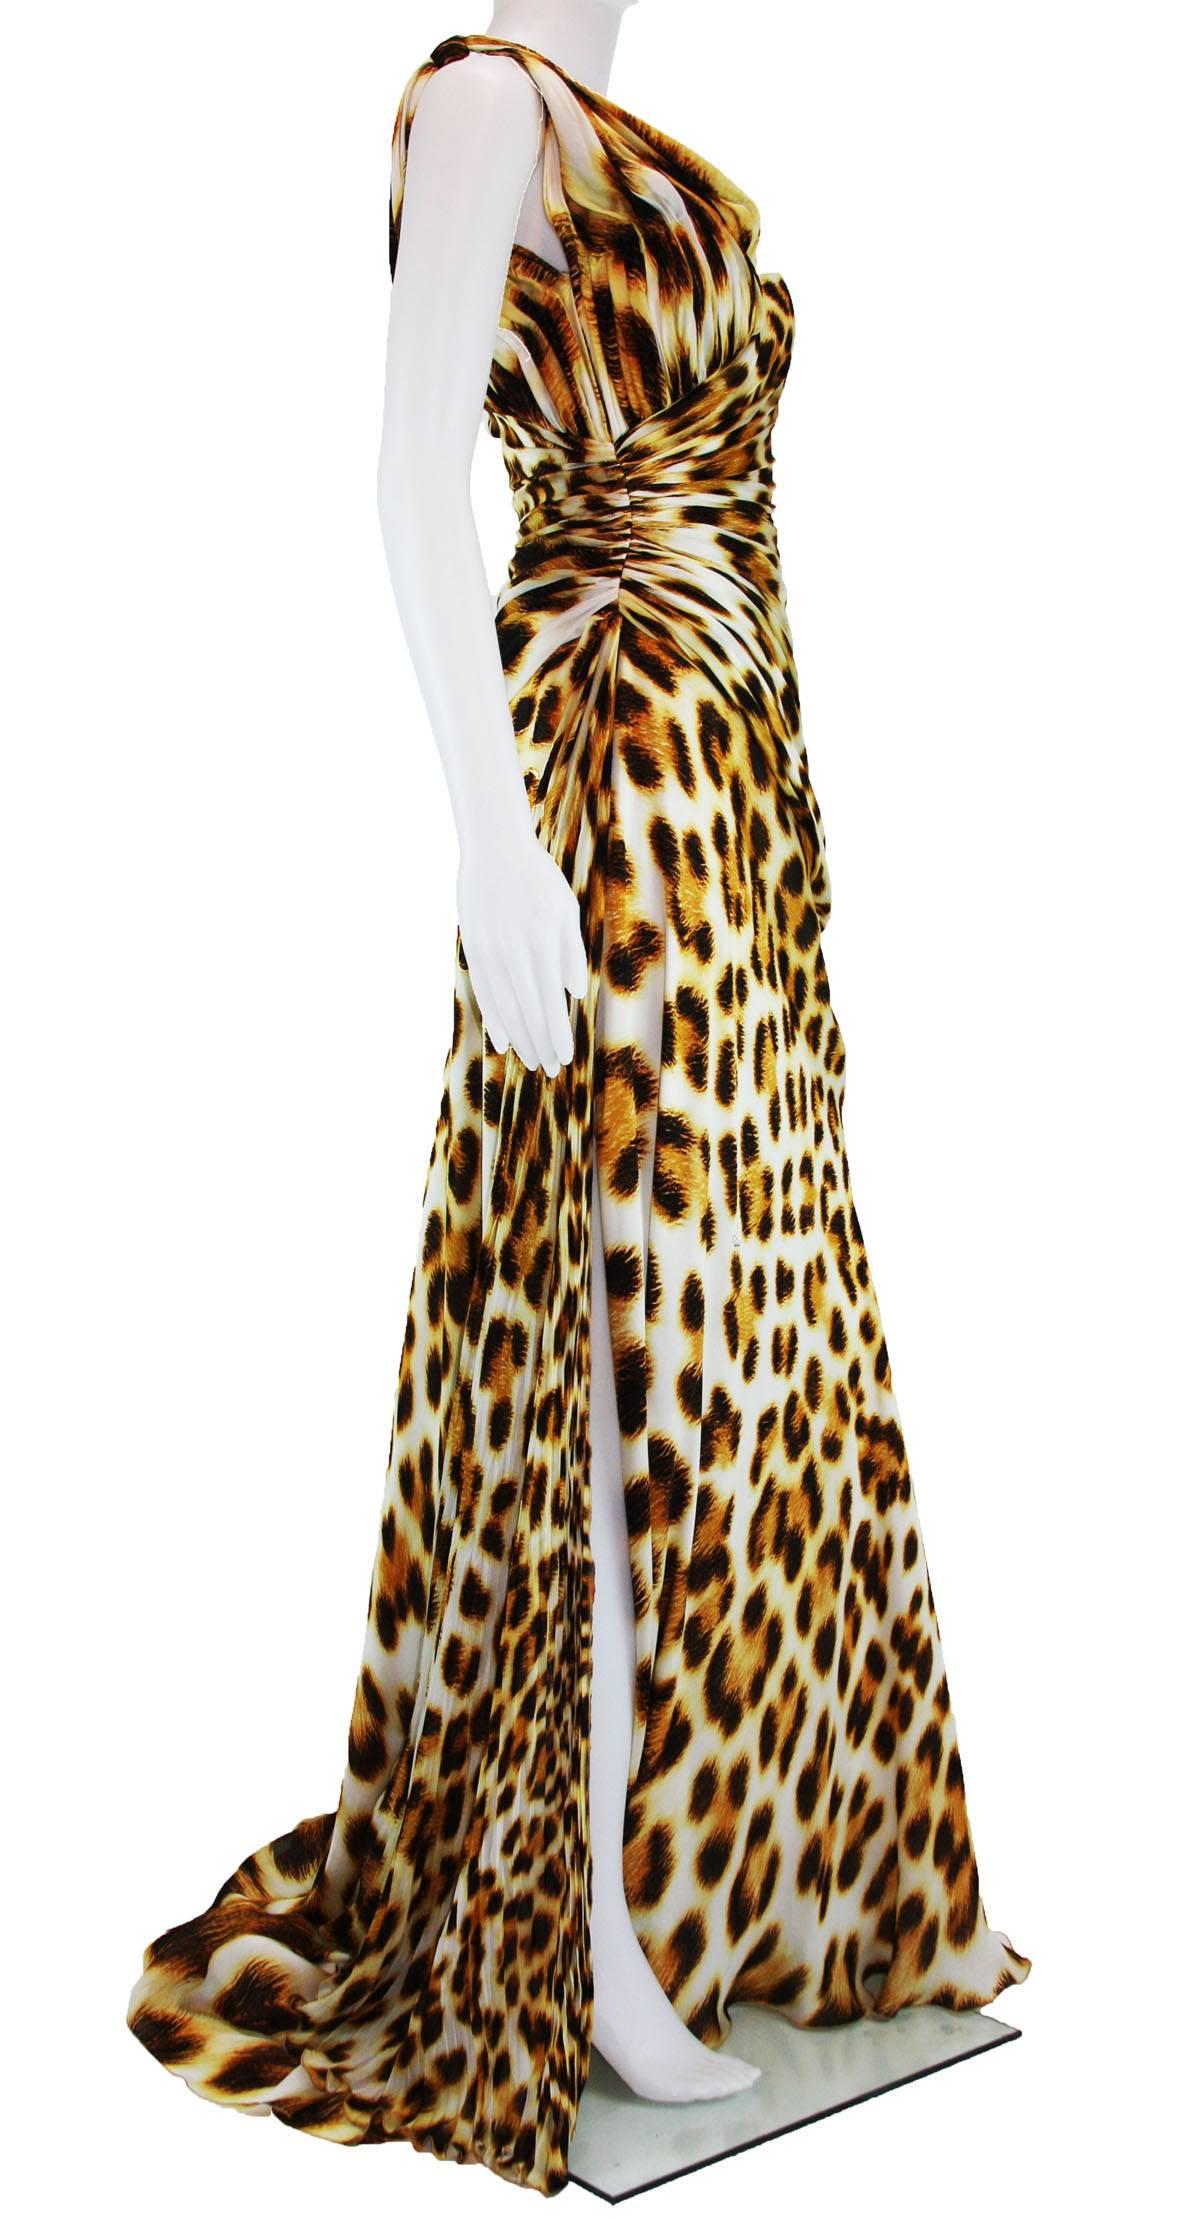 New ROBERTO CAVALLI Silk Leopard Print Gown
Italian Size 42 – US 6
100% Silk – Leopard Print
One Shoulder Style
Ruched Waist, Back Train
Side High Slit
Fully Lined – 100% Silk
Corset Interior
Side Zip Closure
Made in Italy
New with Tag.